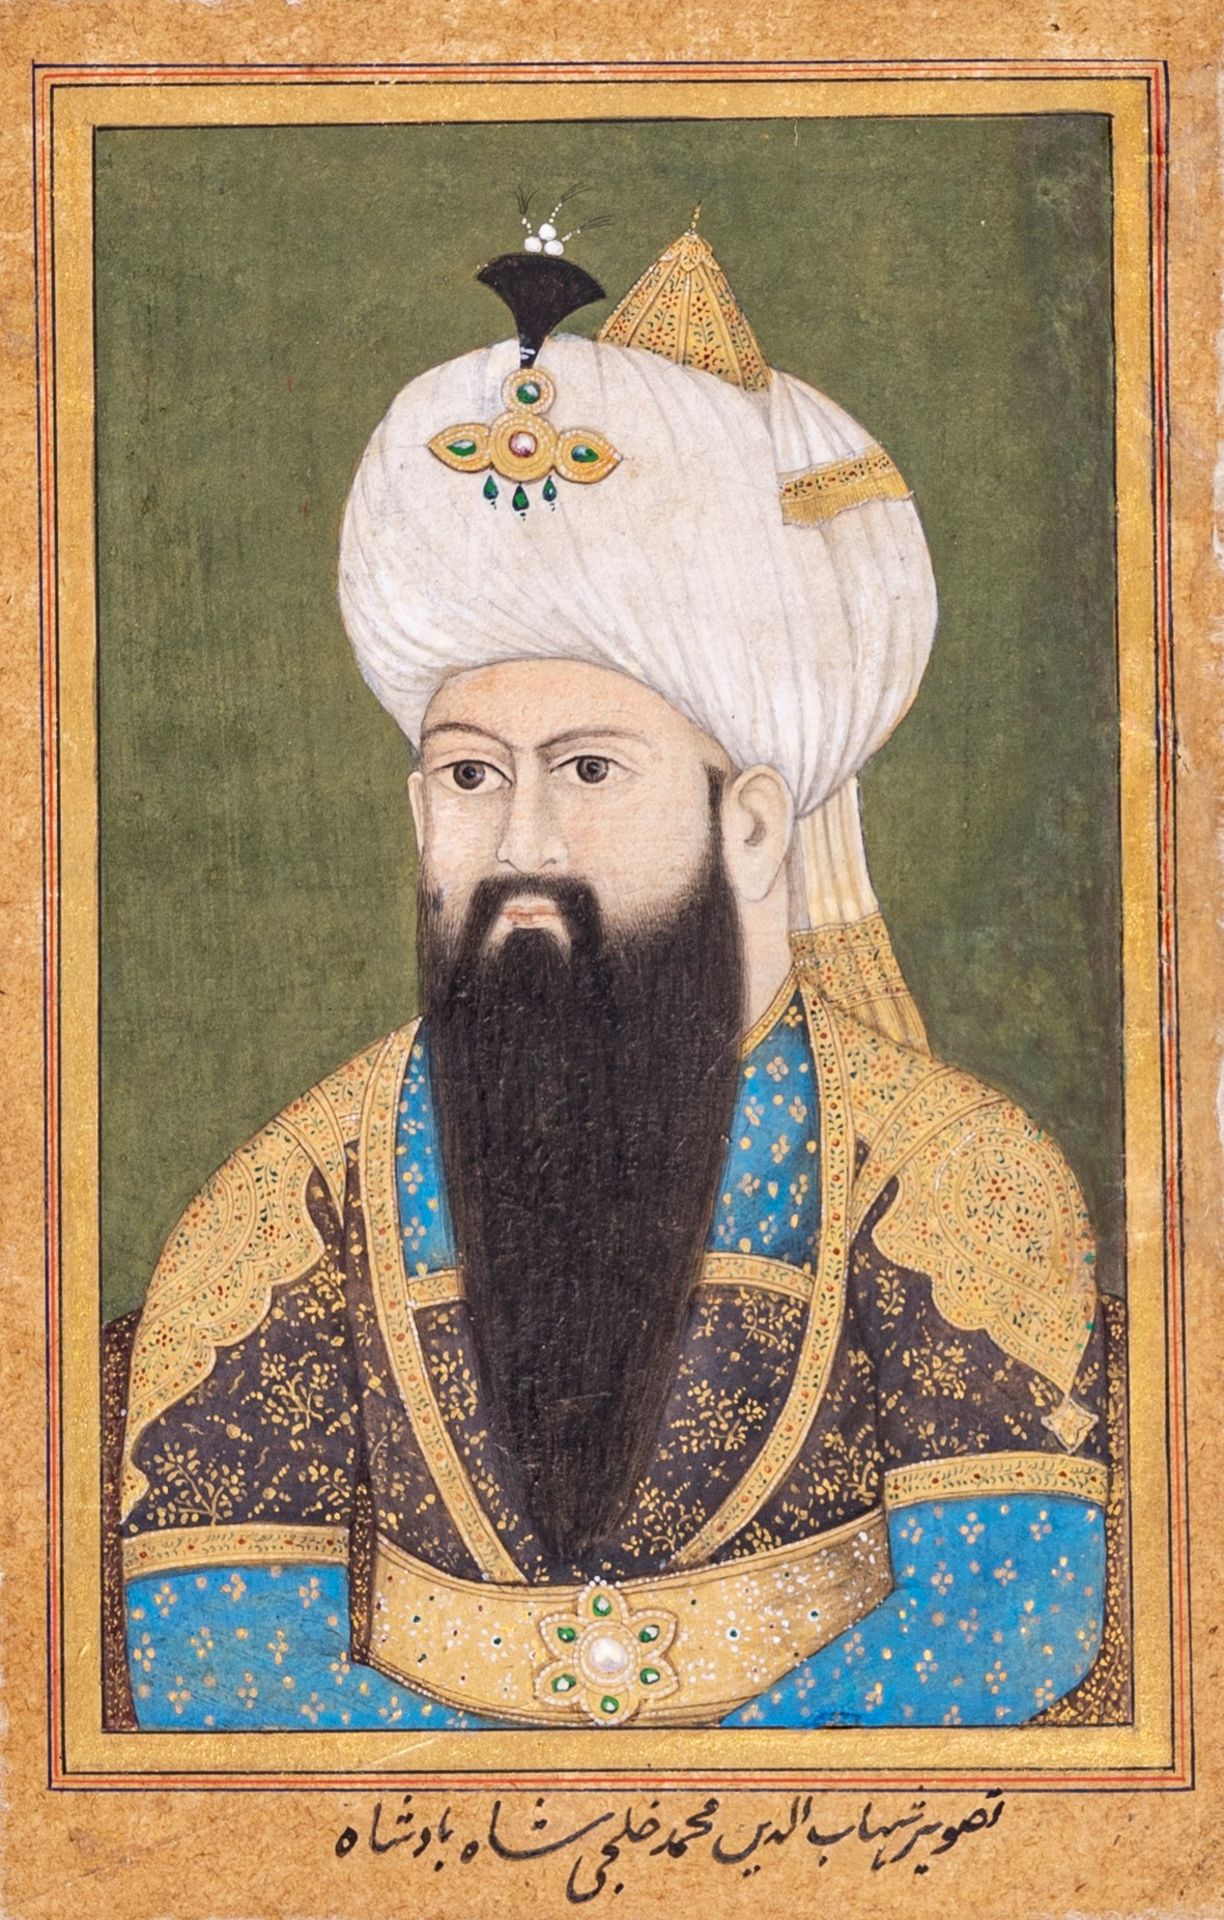 AN INDIAN MINIATURE PAINTING WITH PORTRAIT OF A MUGHAL NOBLEMAN, LATE 19th CENTURY